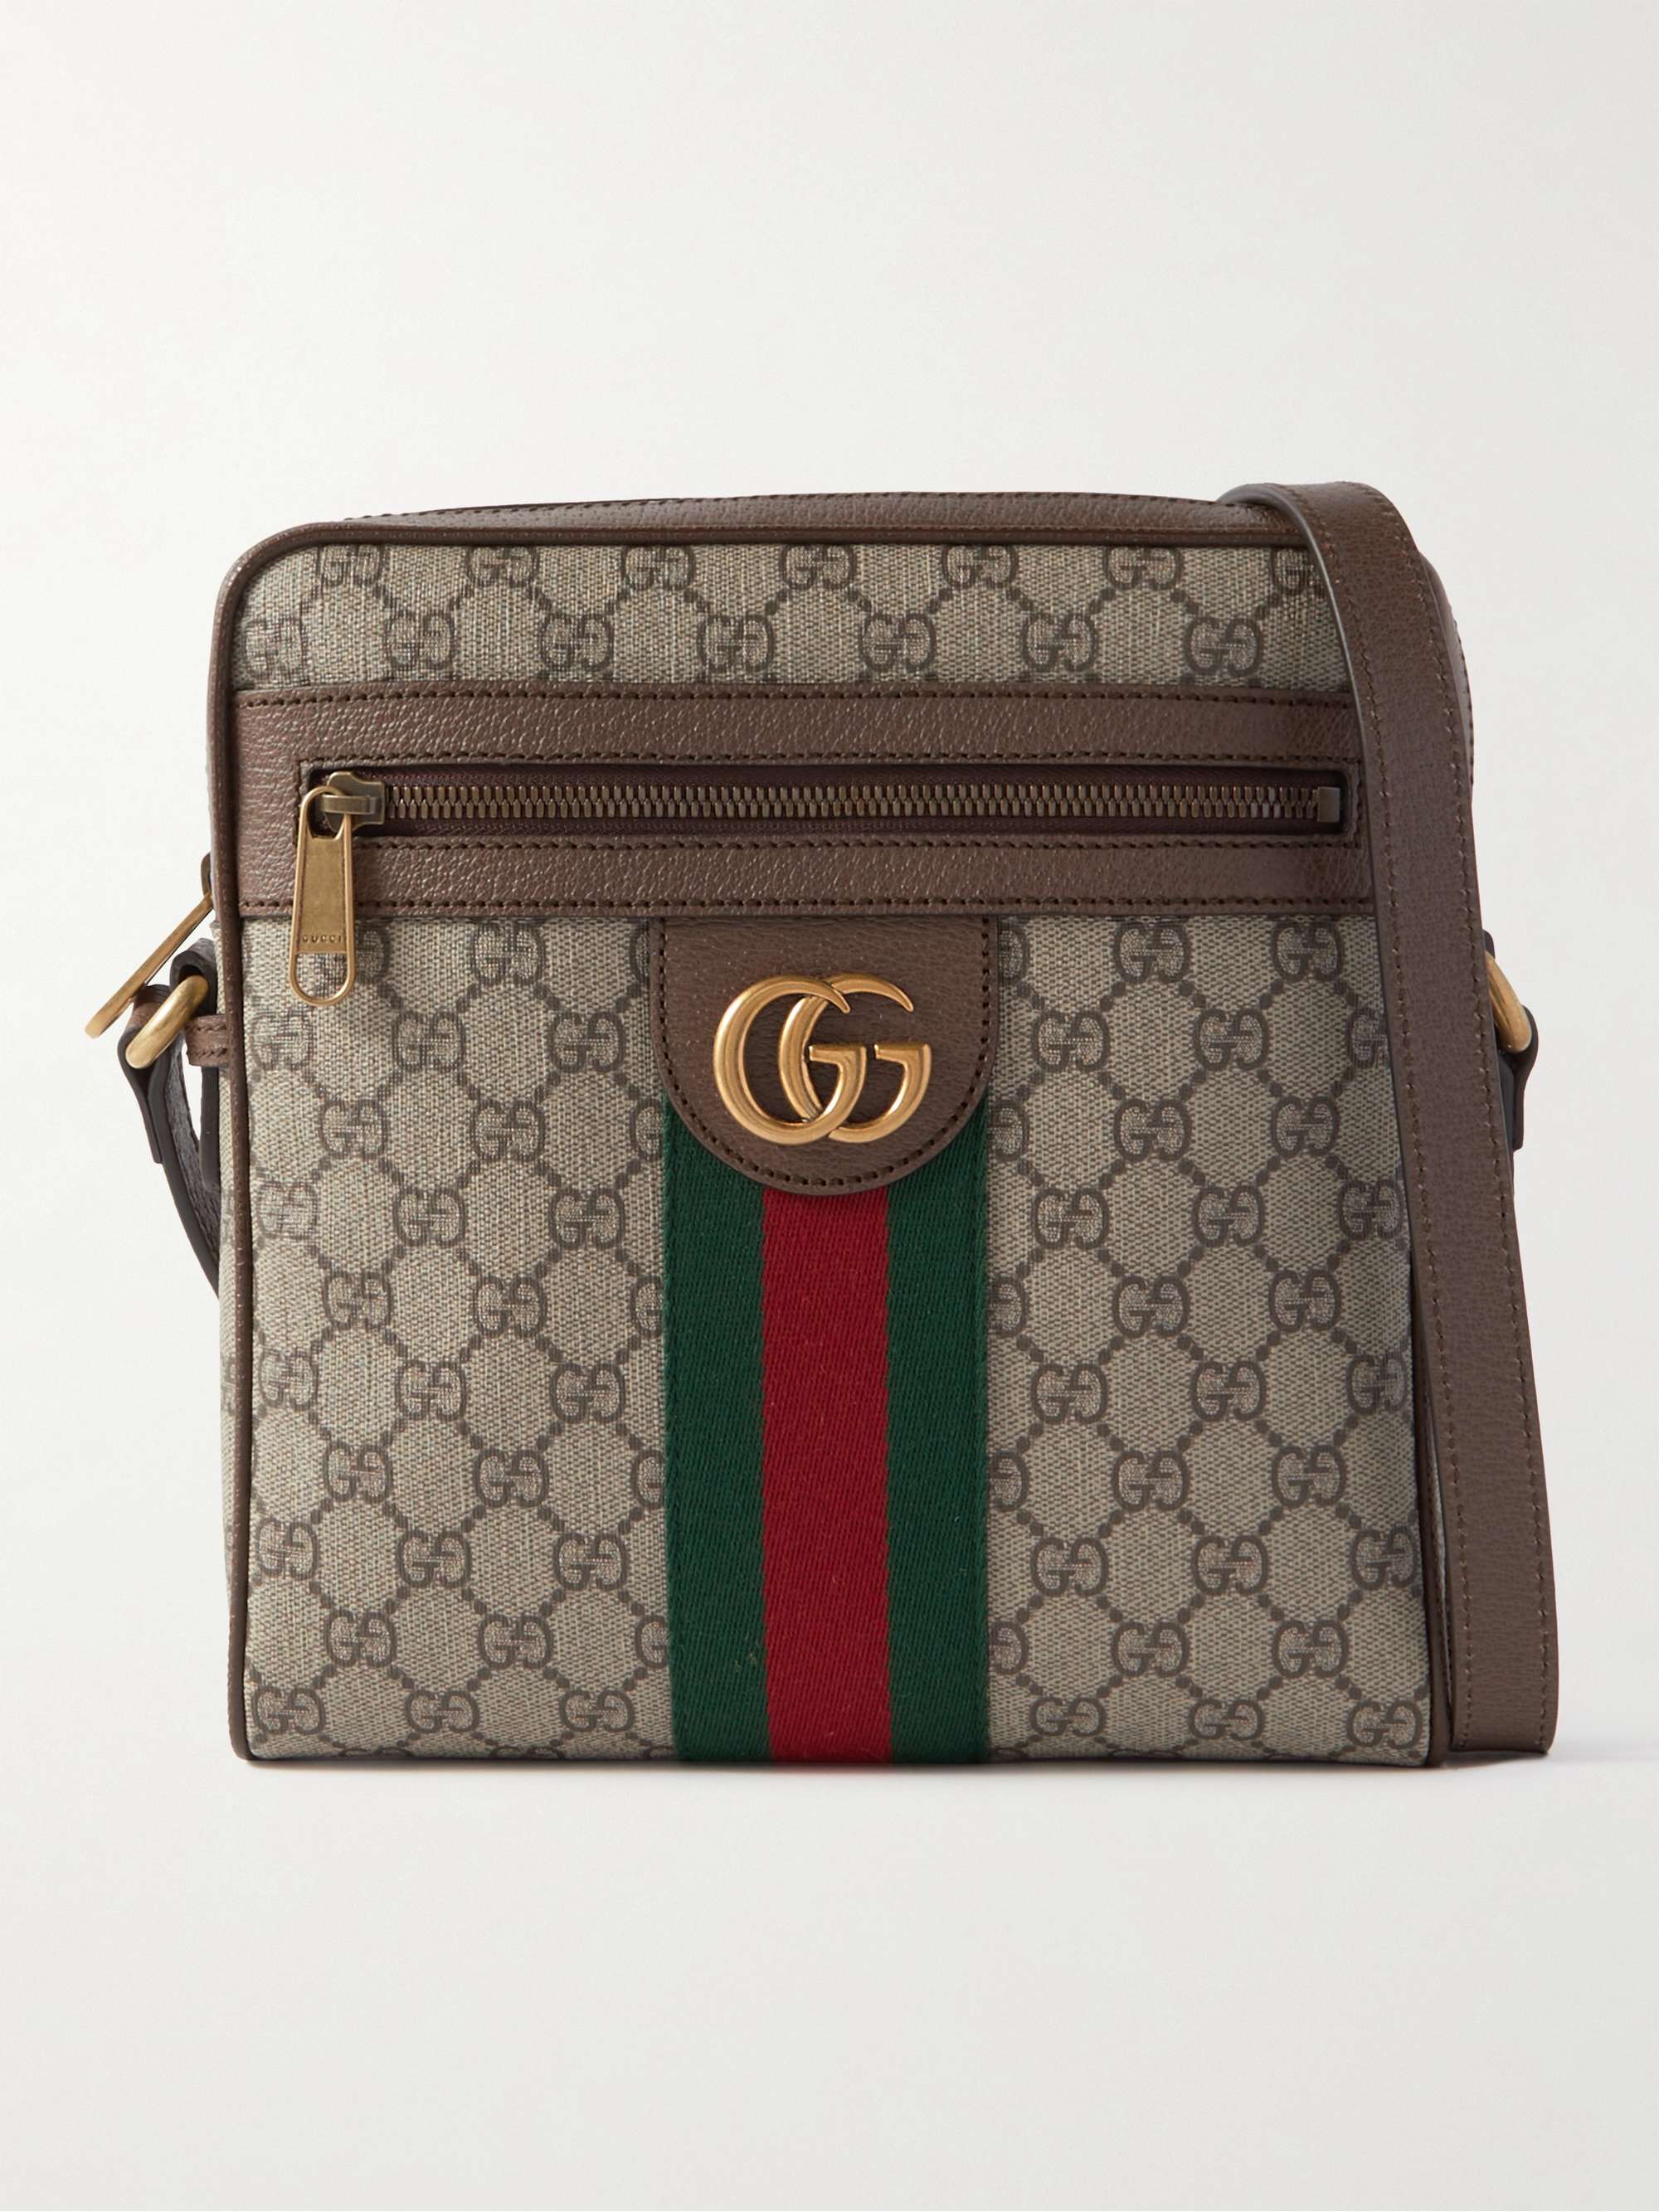 Gucci Men's Monogrammed Coated-Canvas Tote Bag